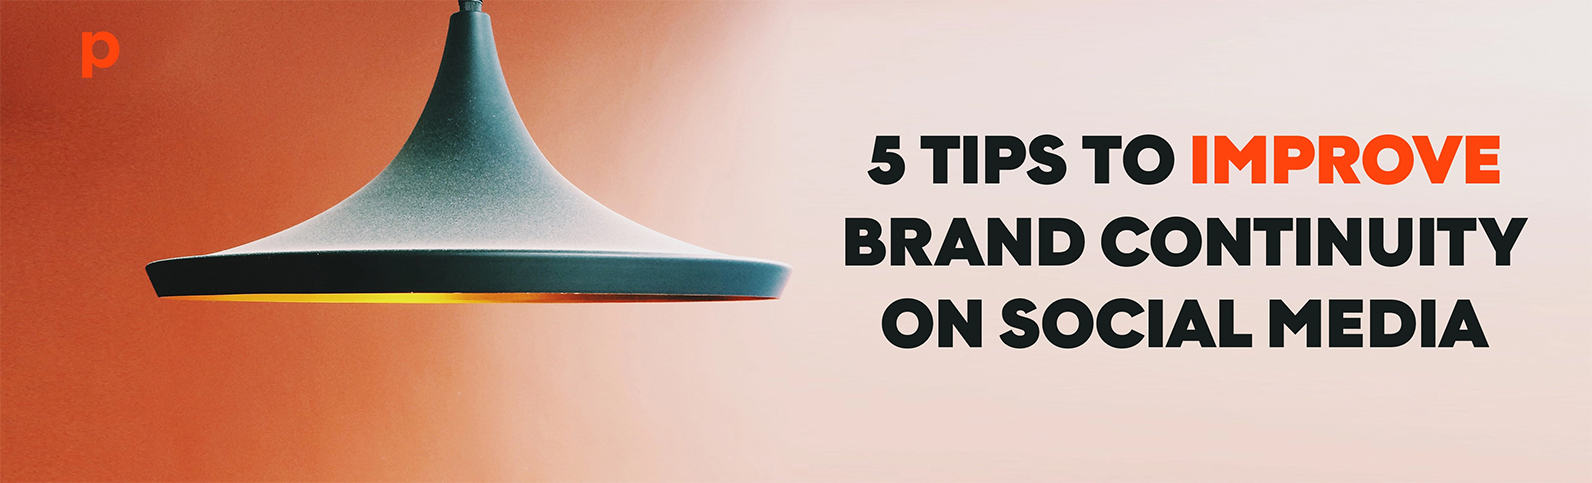 5 Tips to Improve Brand Continuity on Social Media